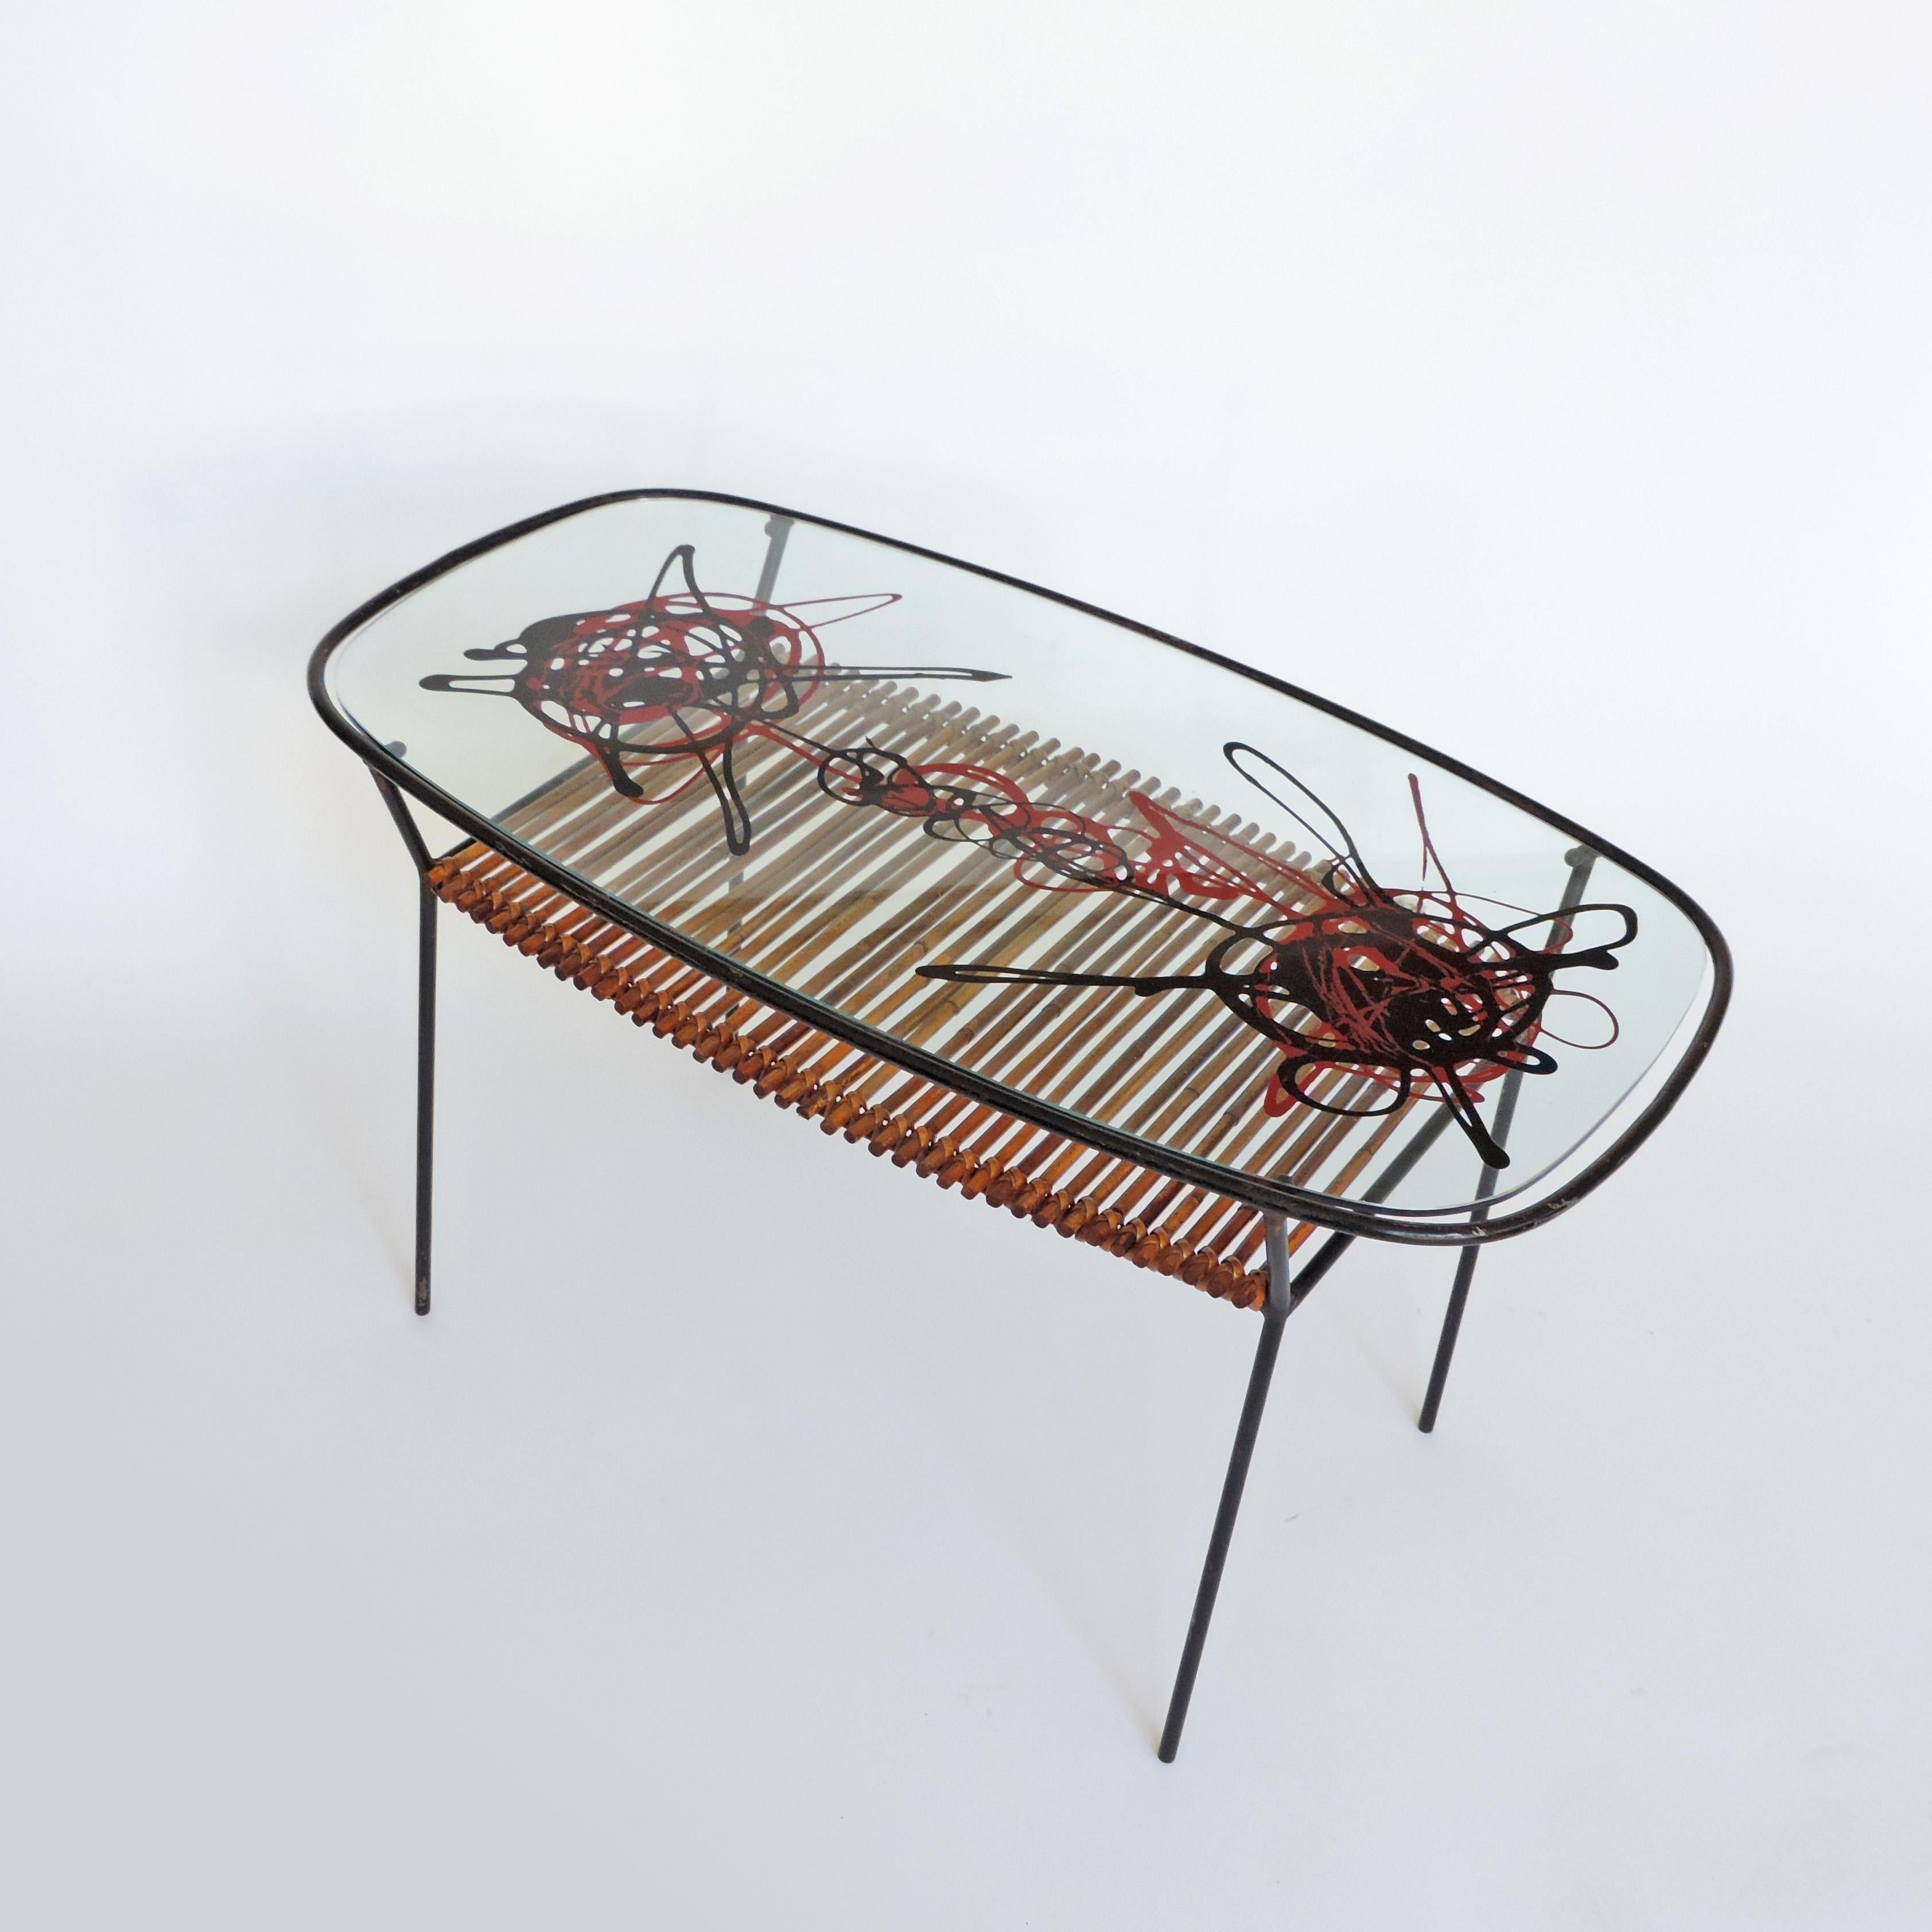 Metal Spirali Coffee Table by Spazialismo Artist Roberto Crippa, Italy, 1950s For Sale